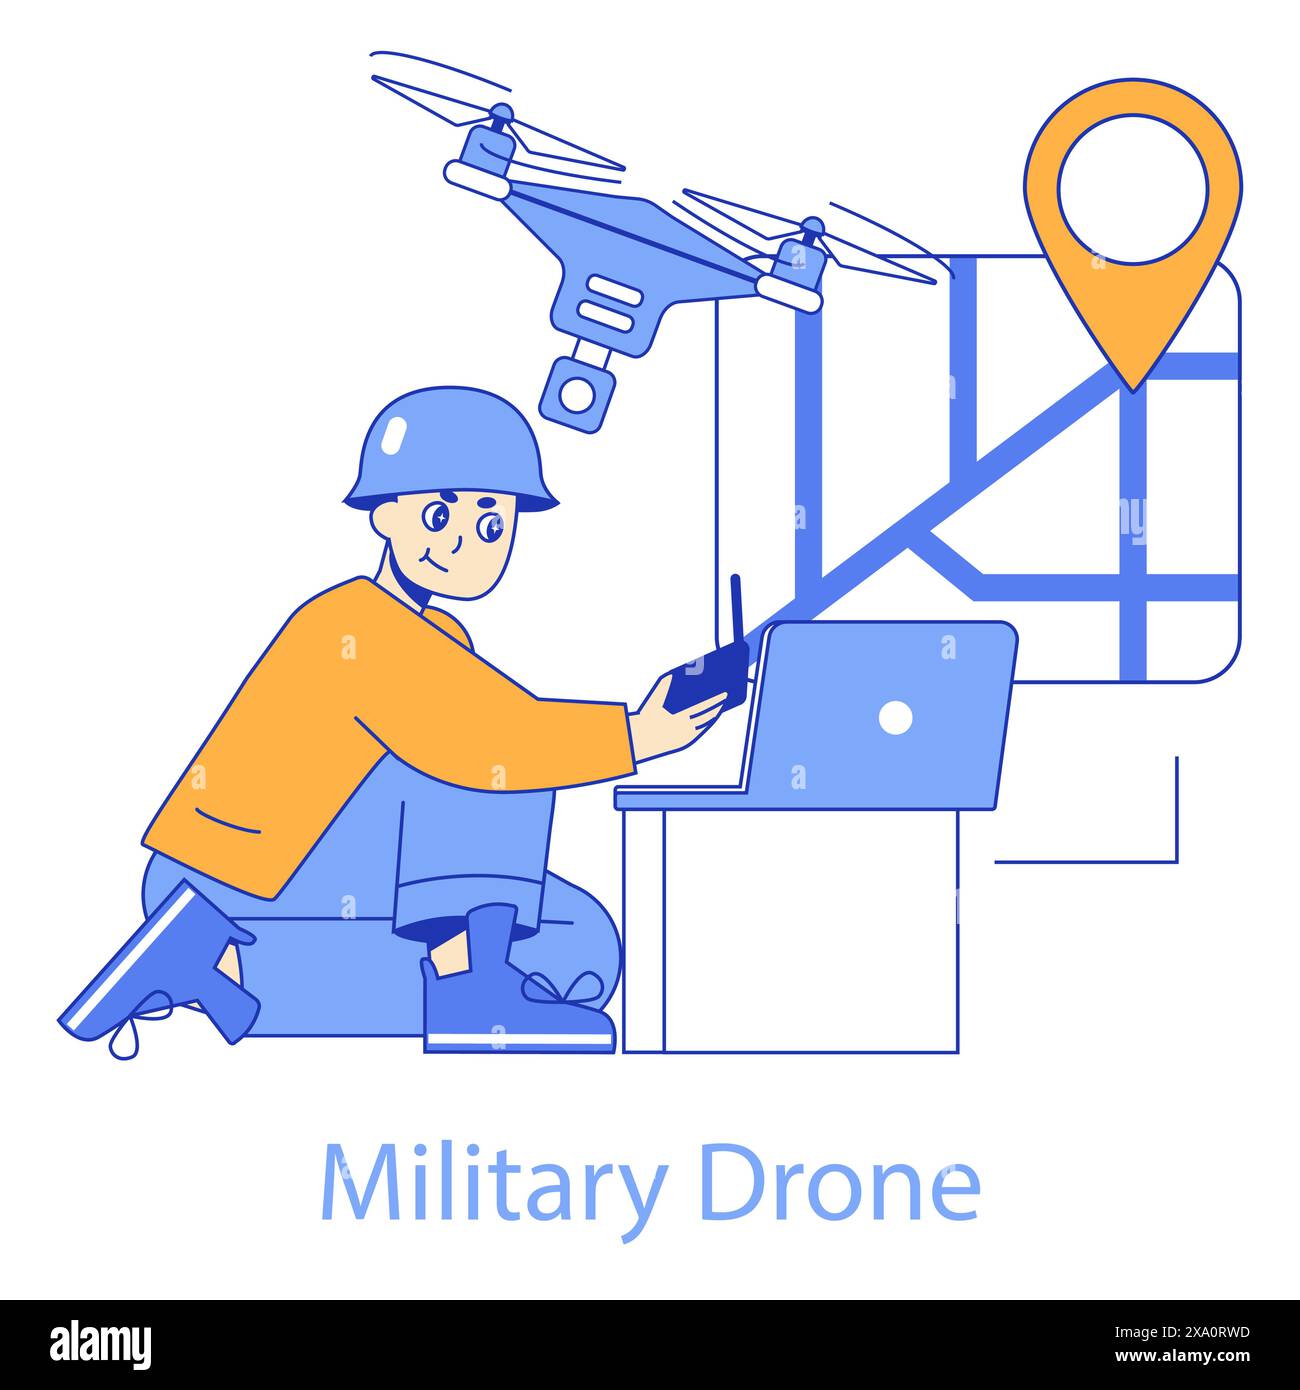 Military Drone concept. Tactical surveillance with advanced robotics. Operator controlling unmanned aerial vehicle for strategic oversight. Vector illustration. Stock Vector